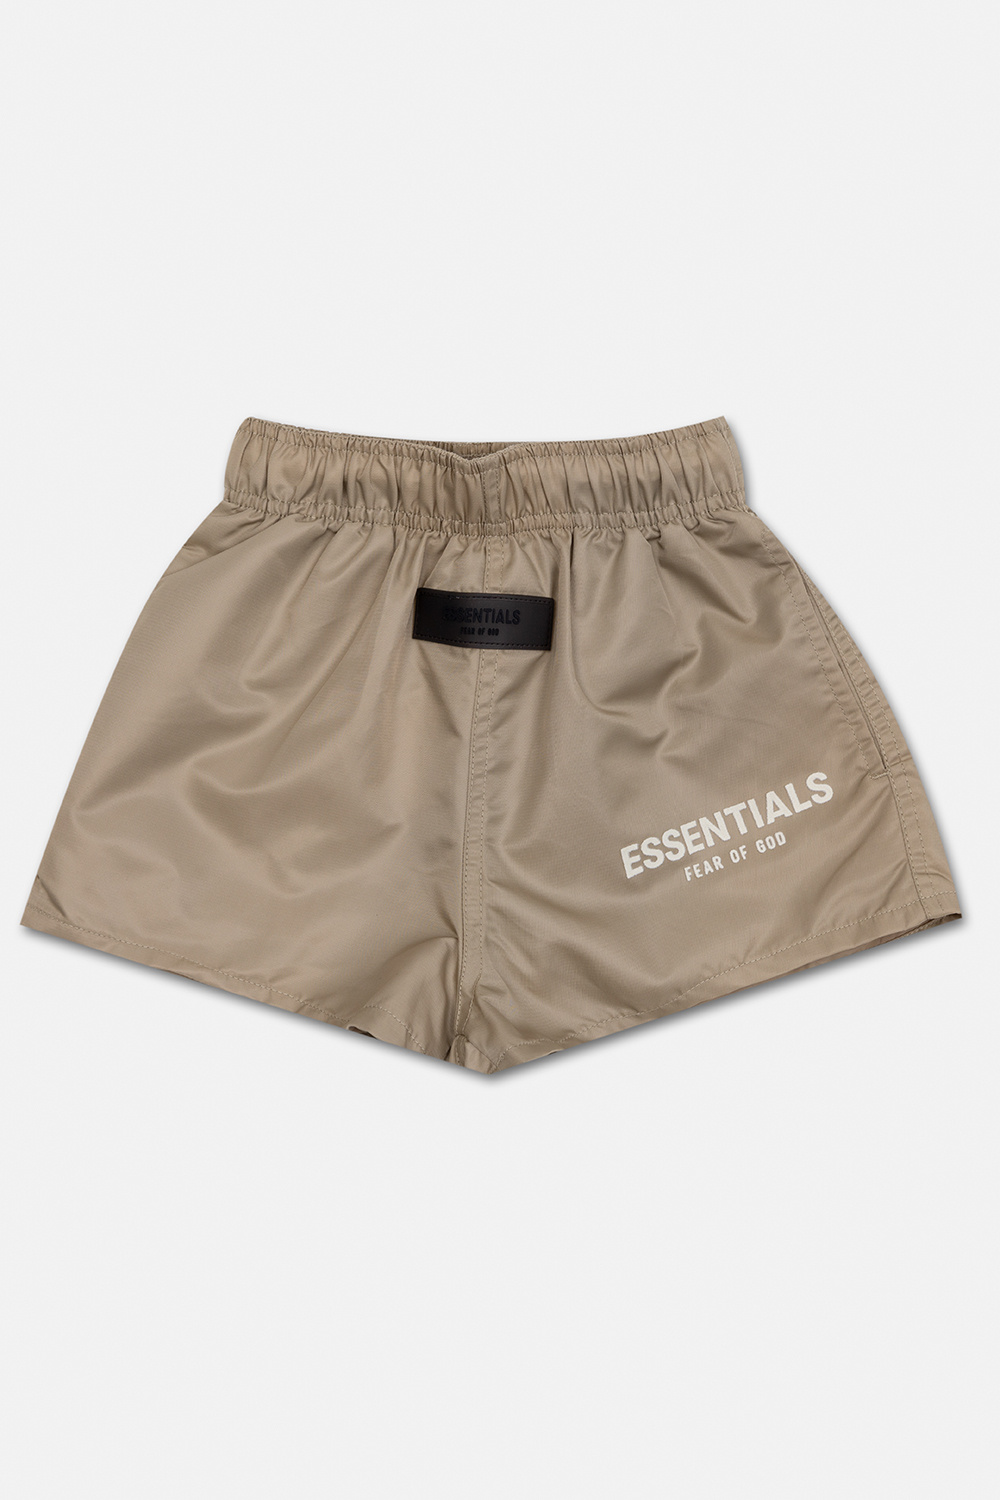 Fear Of God Essentials Kids Shorts with logo | IetpShops | 14 years) - alpha  industries crew shorts sand | Kids\'s Girls clothes (4